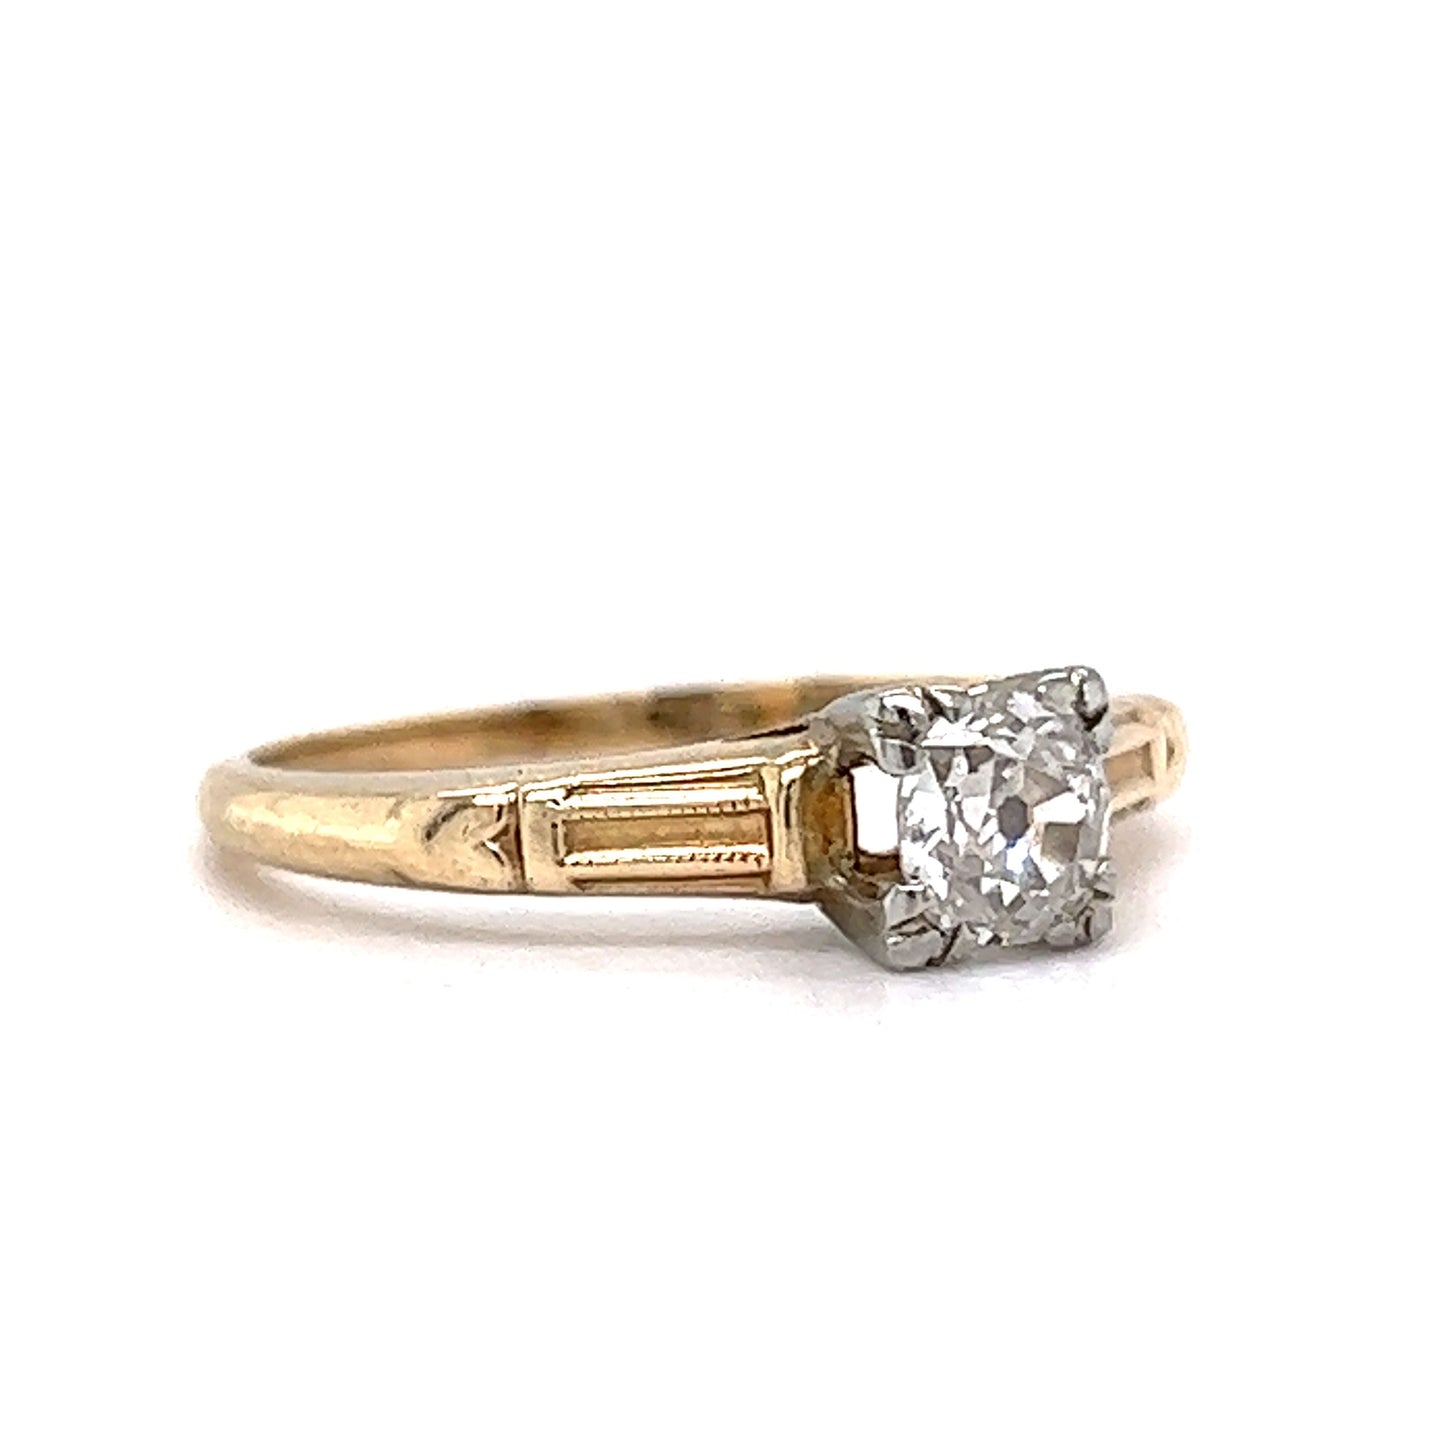 .25 Retro Solitaire Diamond Engagement Ring in 14k & 18k Gold